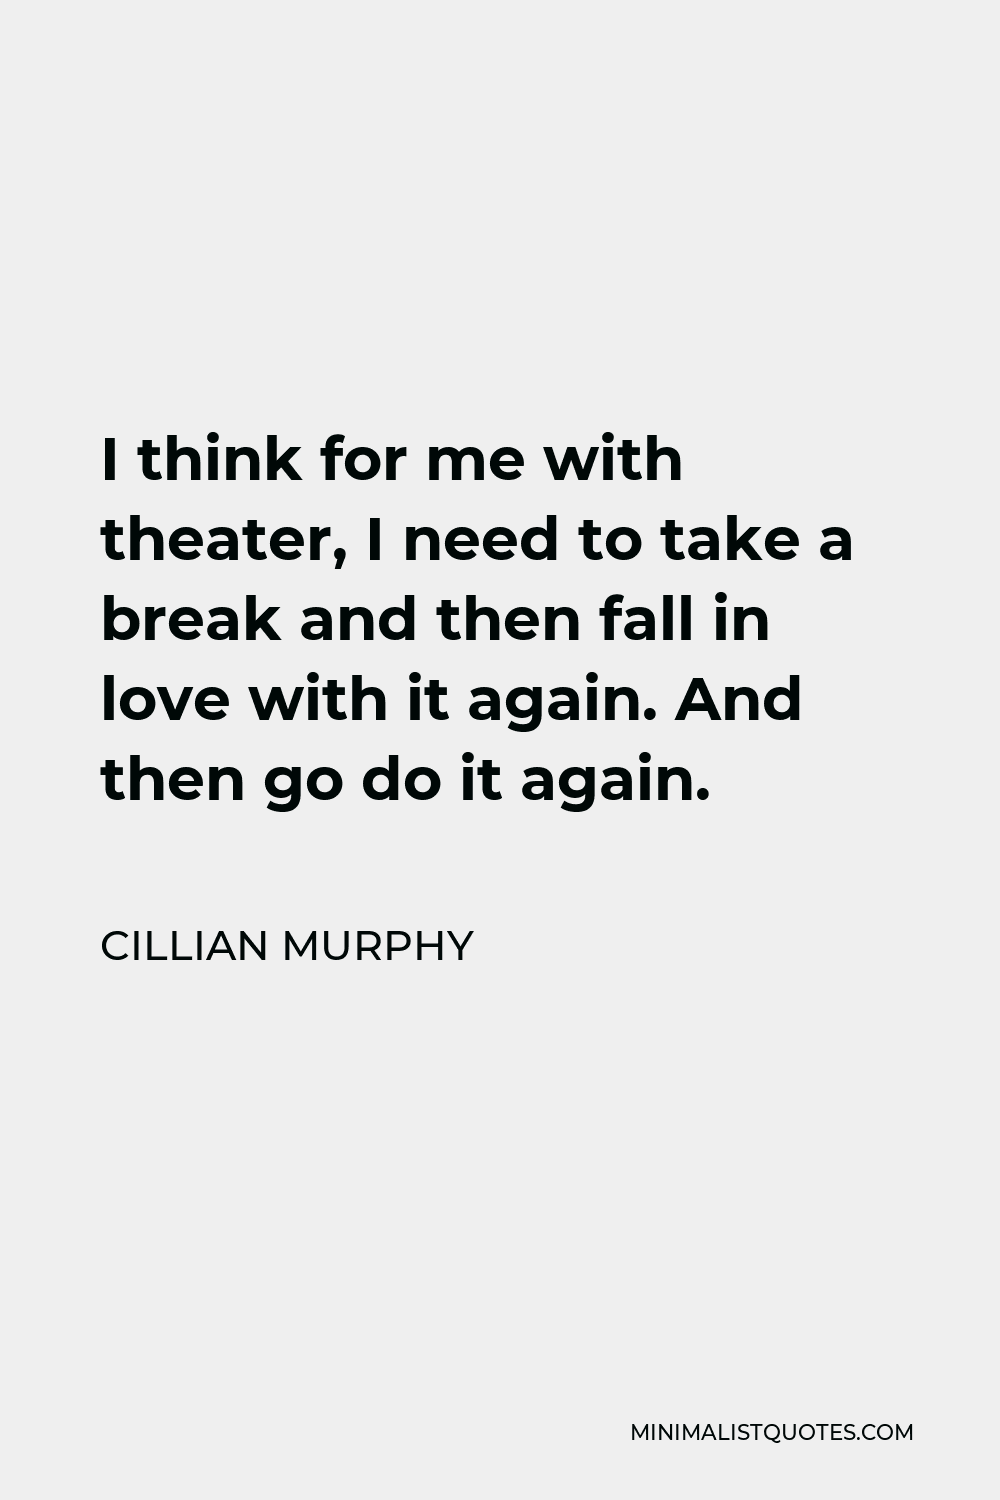 Cillian Murphy Quote - I think for me with theater, I need to take a break and then fall in love with it again. And then go do it again.